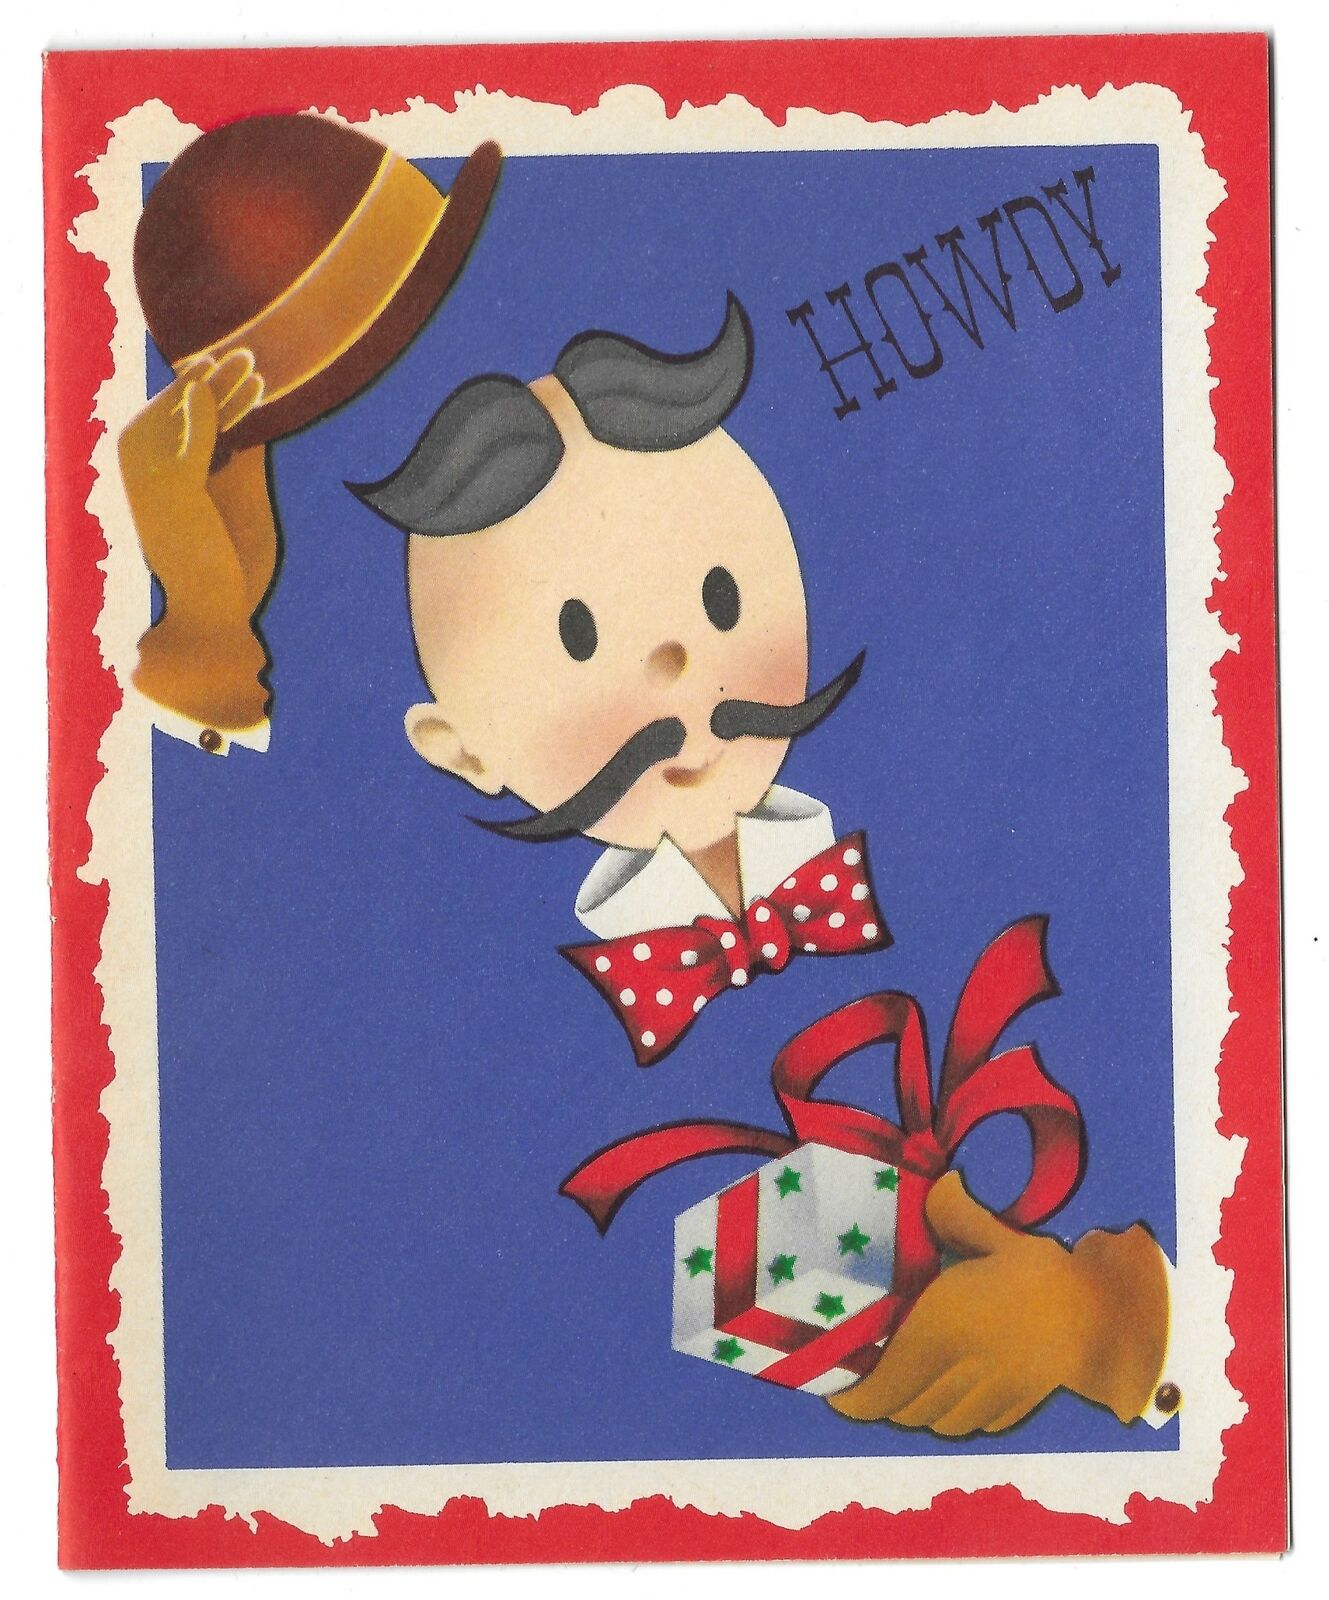 VINTAGE 1940s WWII ERA Christmas & New Year Greeting Card Art Deco Man HOWDY